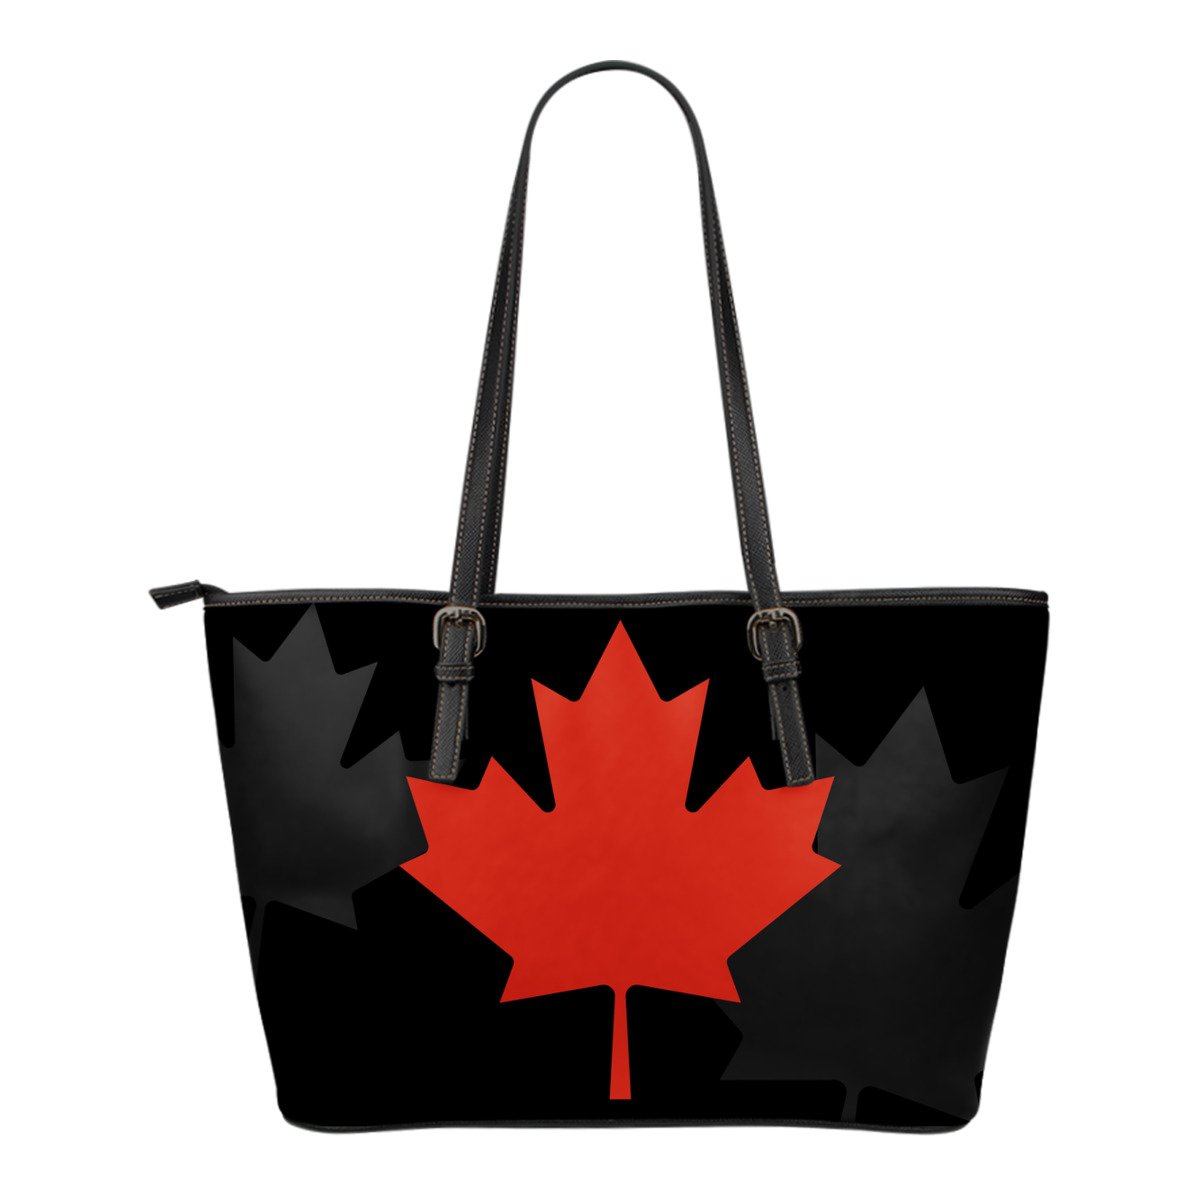 canada-leather-tote-bag-small-size